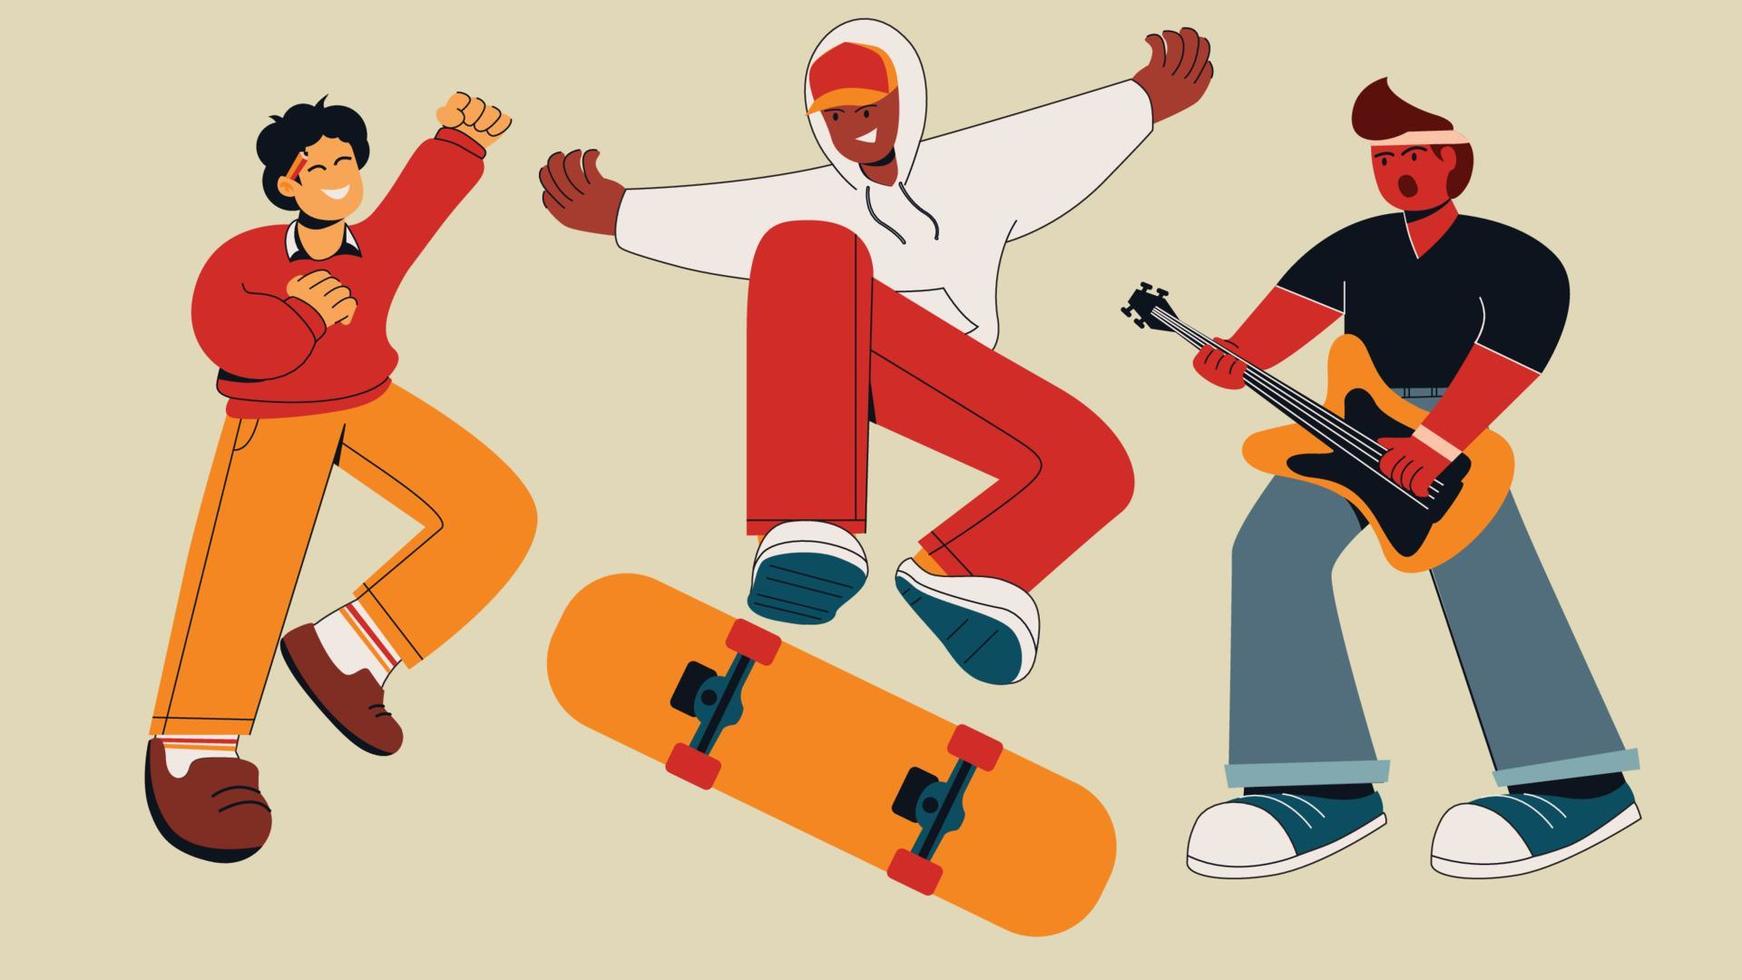 People with Hobbies playing guitars and skate boards flat character vector